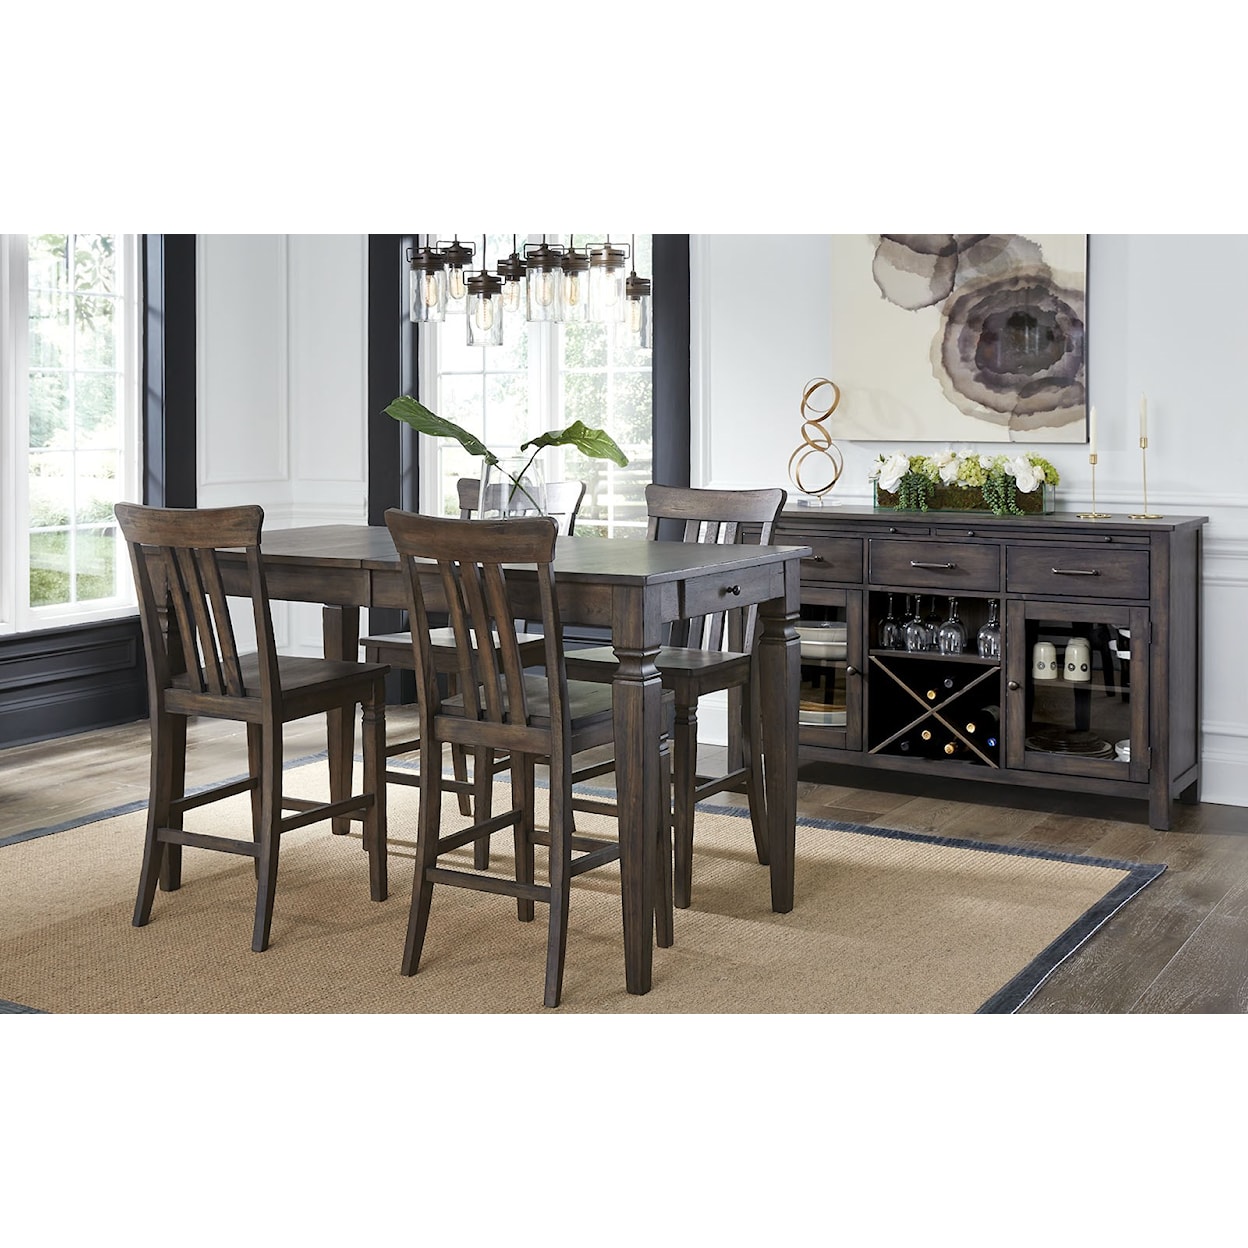 AAmerica Kingston Counter Height Table